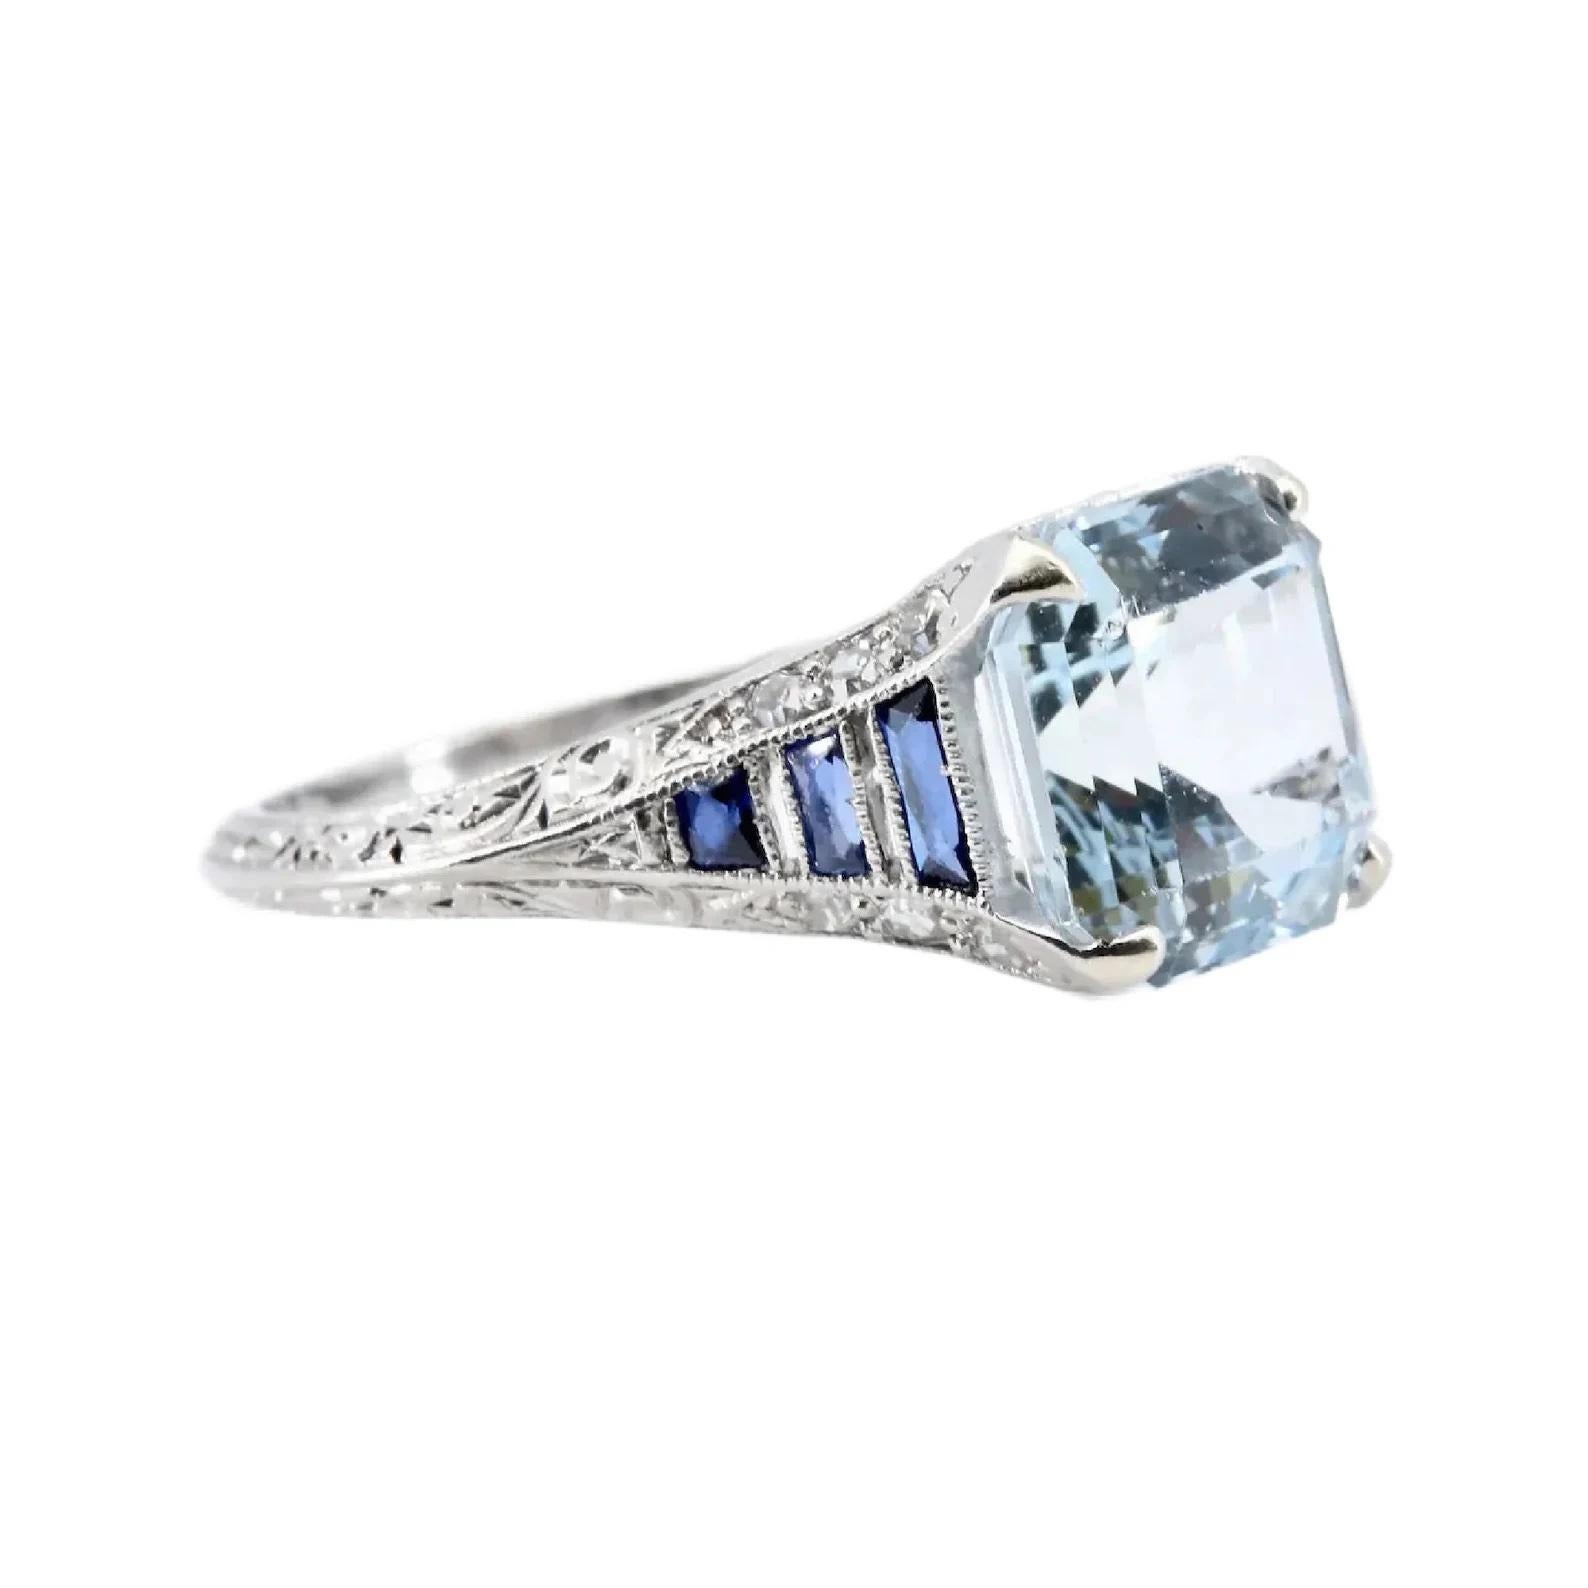 A striking Art Deco period Aquamarine, Sapphire, and Diamond ring in platinum.

Centered by a 3.40 carat Asscher cut Santa Maria aquamarine secured by four claw form prongs.

Framed by six vivid blue trapezoid shaped French cut sapphires, cut to